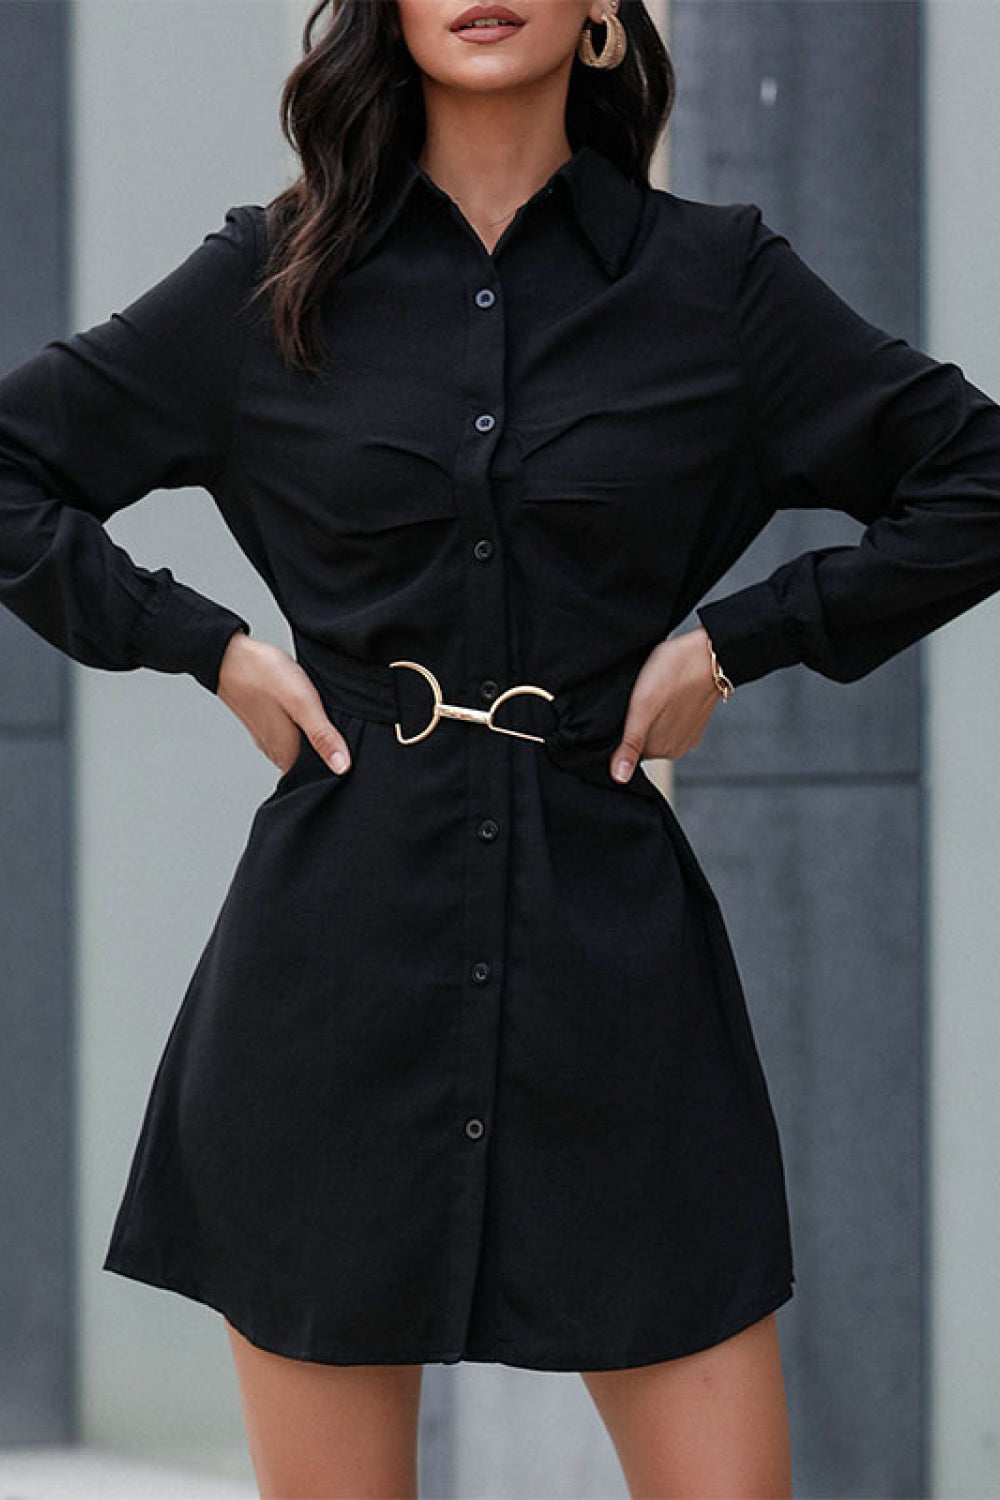 Home Office or a Night Out Chic Collared Shirt Dress with Belt 